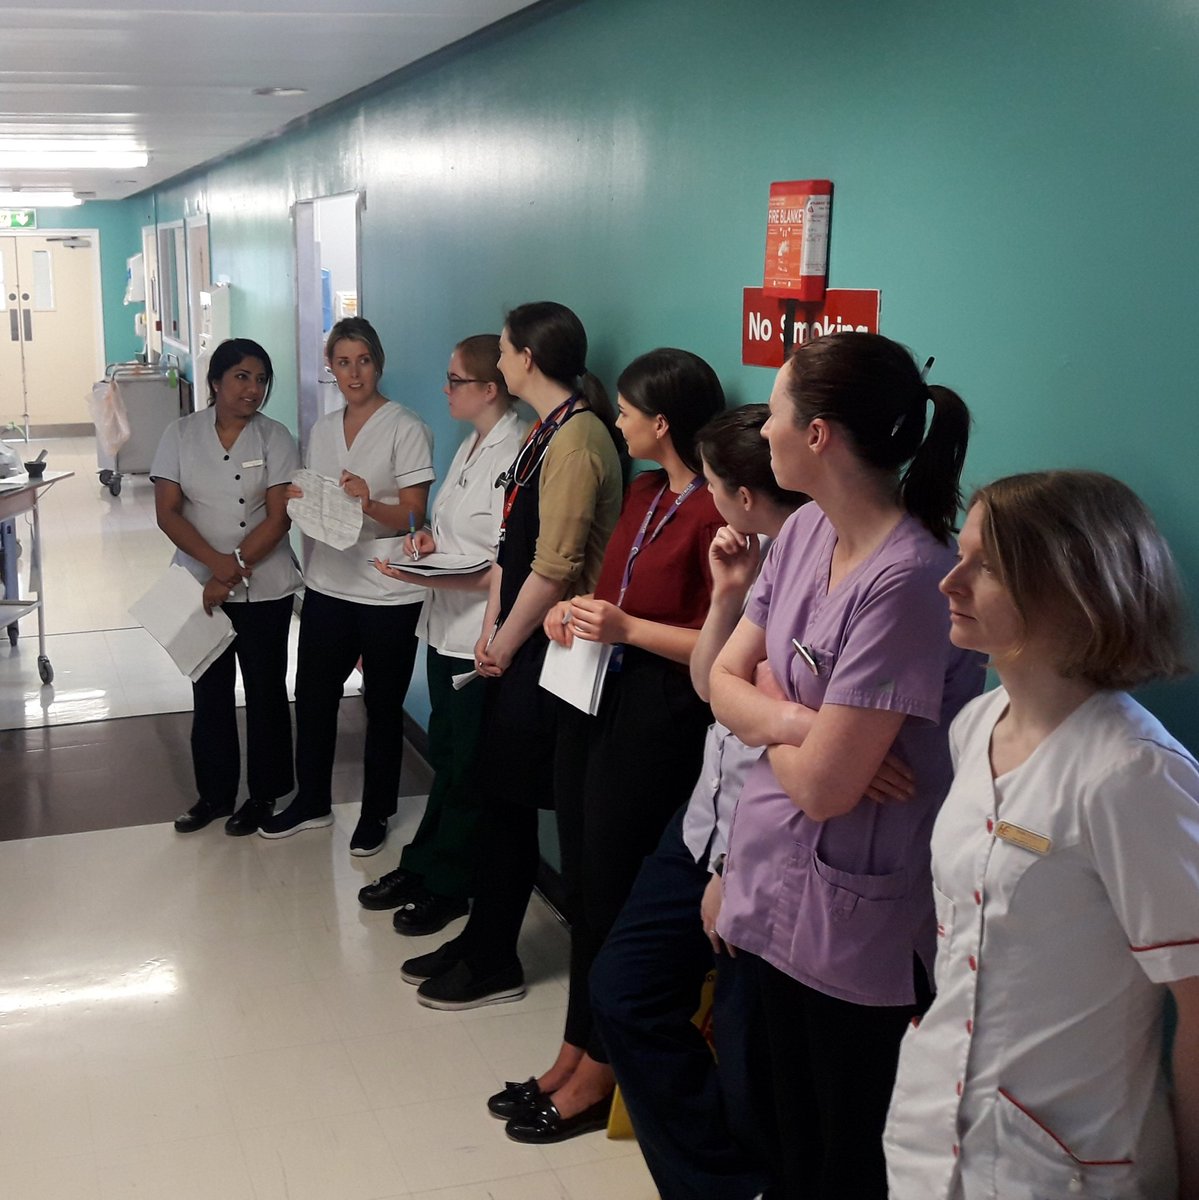 Excellent examples of MDT collaborating at the daily patient saftey huddles 
on the stroke and surgical wards #patientsafety #improvingcare #thisishowwehuddle @CUHimprovers @DorothyBreen2 @SineadHorgan1 @NationalQI @Yasserkayyal_MD @TheIHI @drliamhealy @carolyn